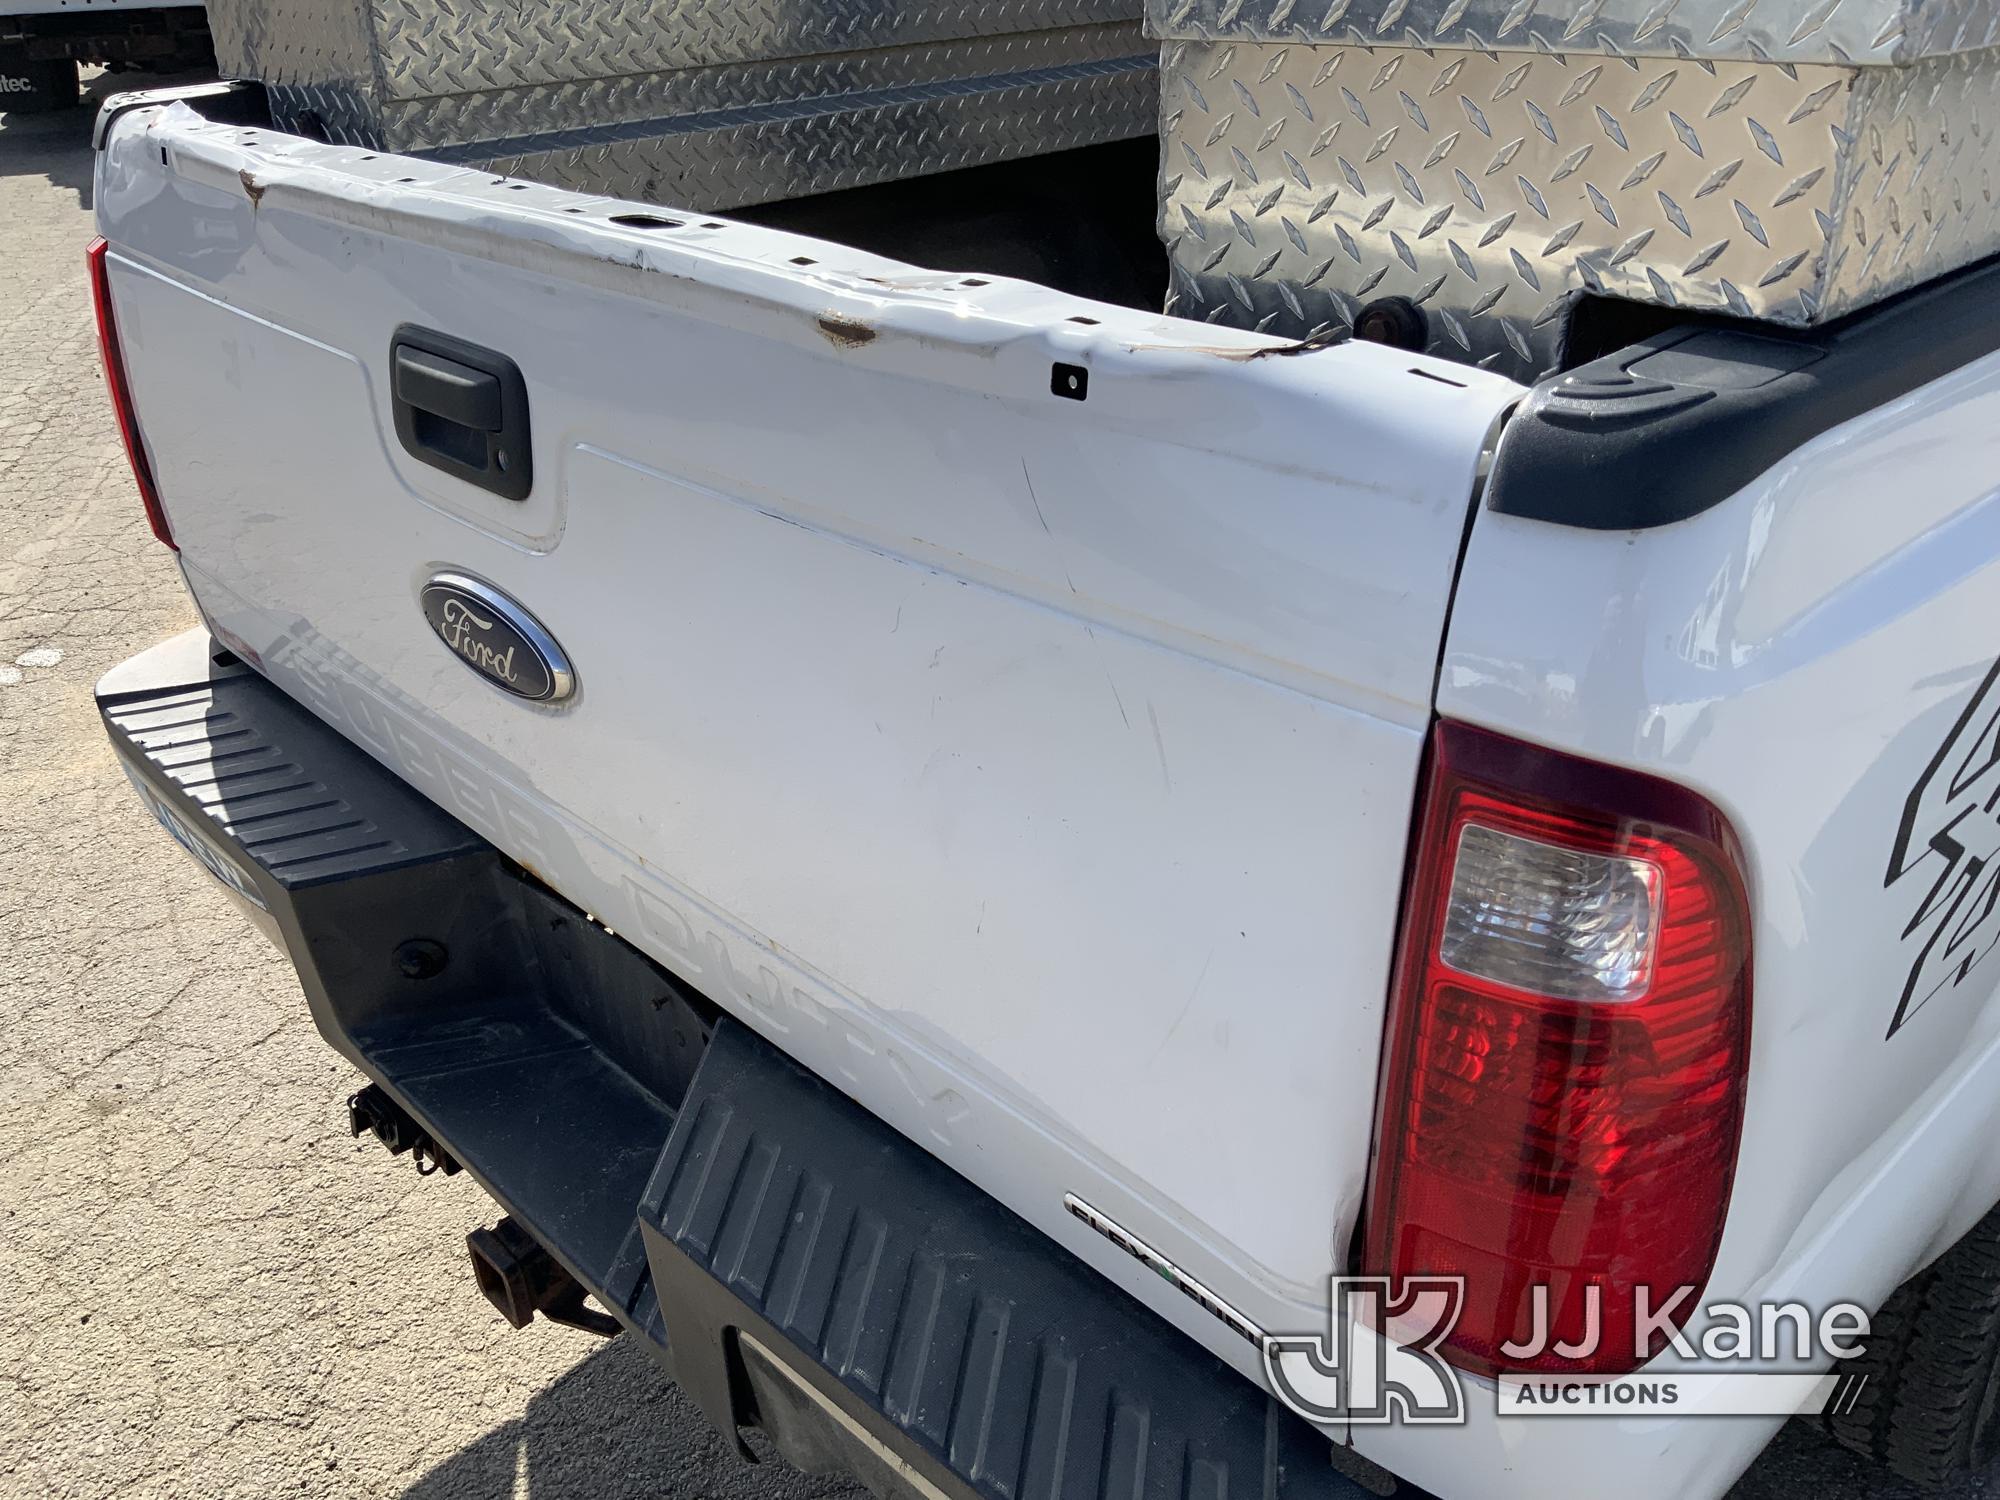 (South Beloit, IL) 2015 Ford F250 4x4 Extended-Cab Pickup Truck Runs, Moves, Body Damage